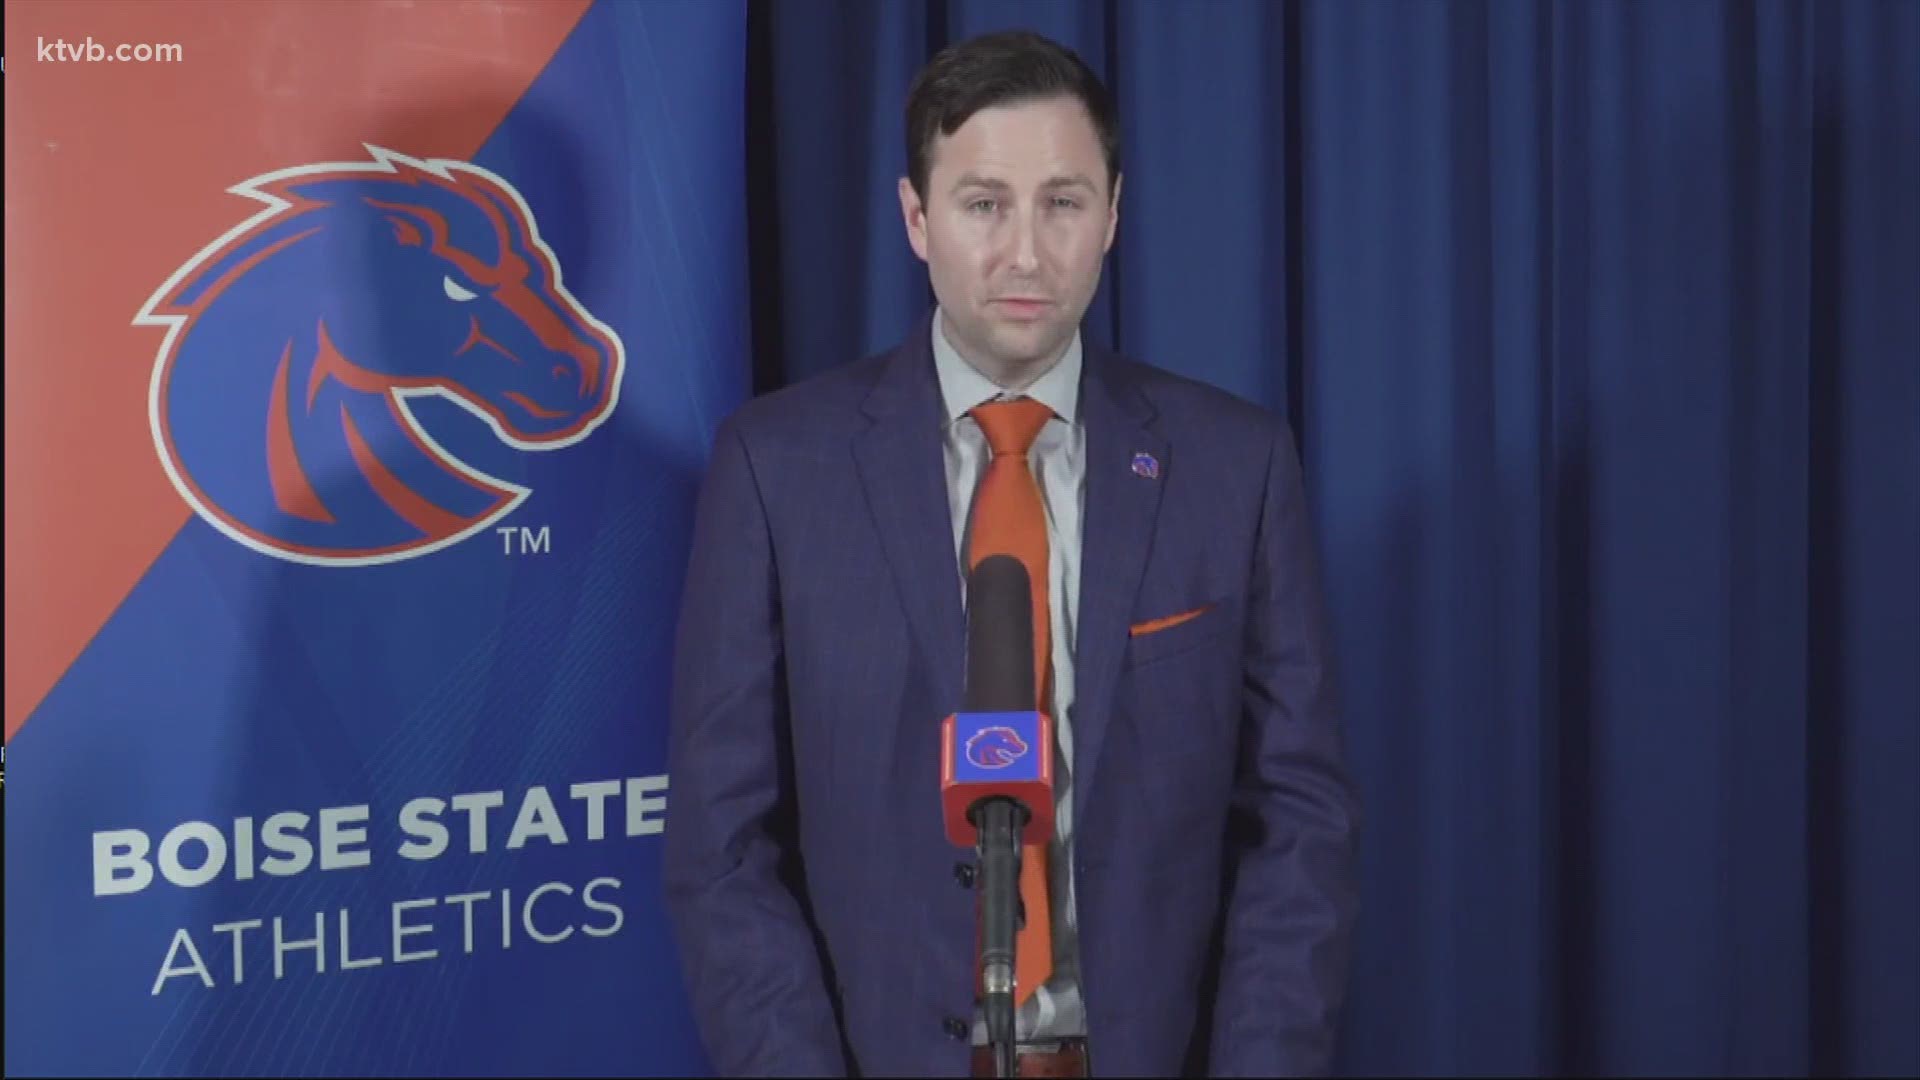 One of Boise State's own is returning home to lead the Broncos' football program as head coach.